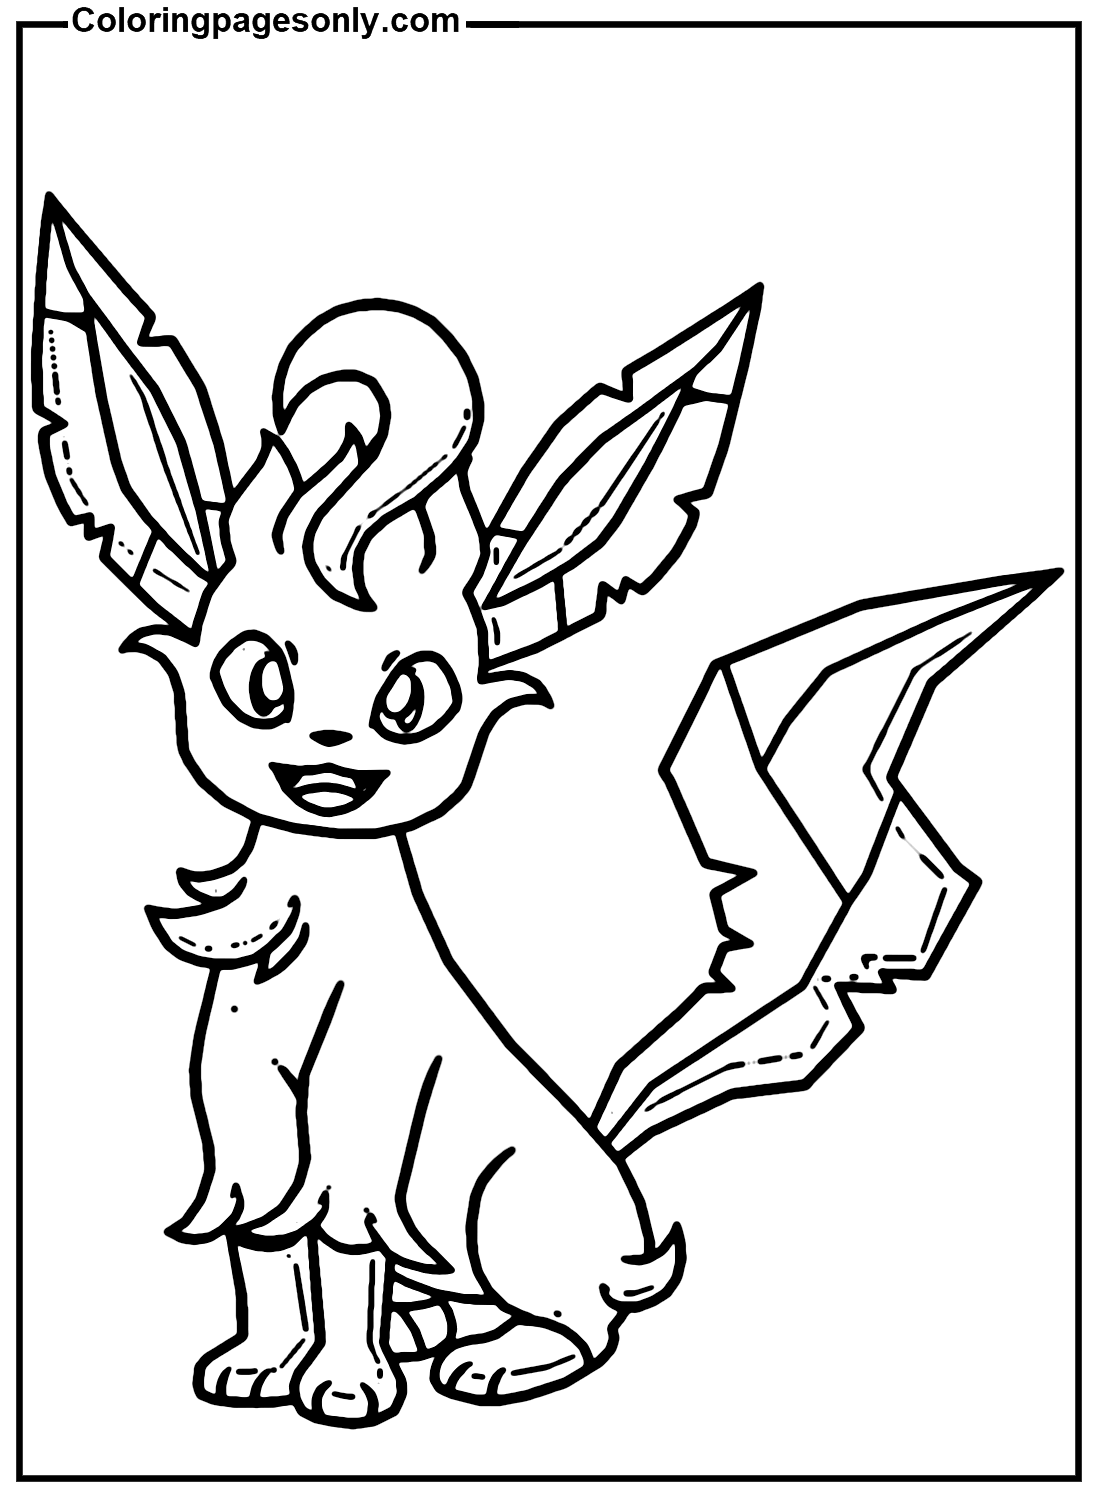 Leafeon Image from Leafeon